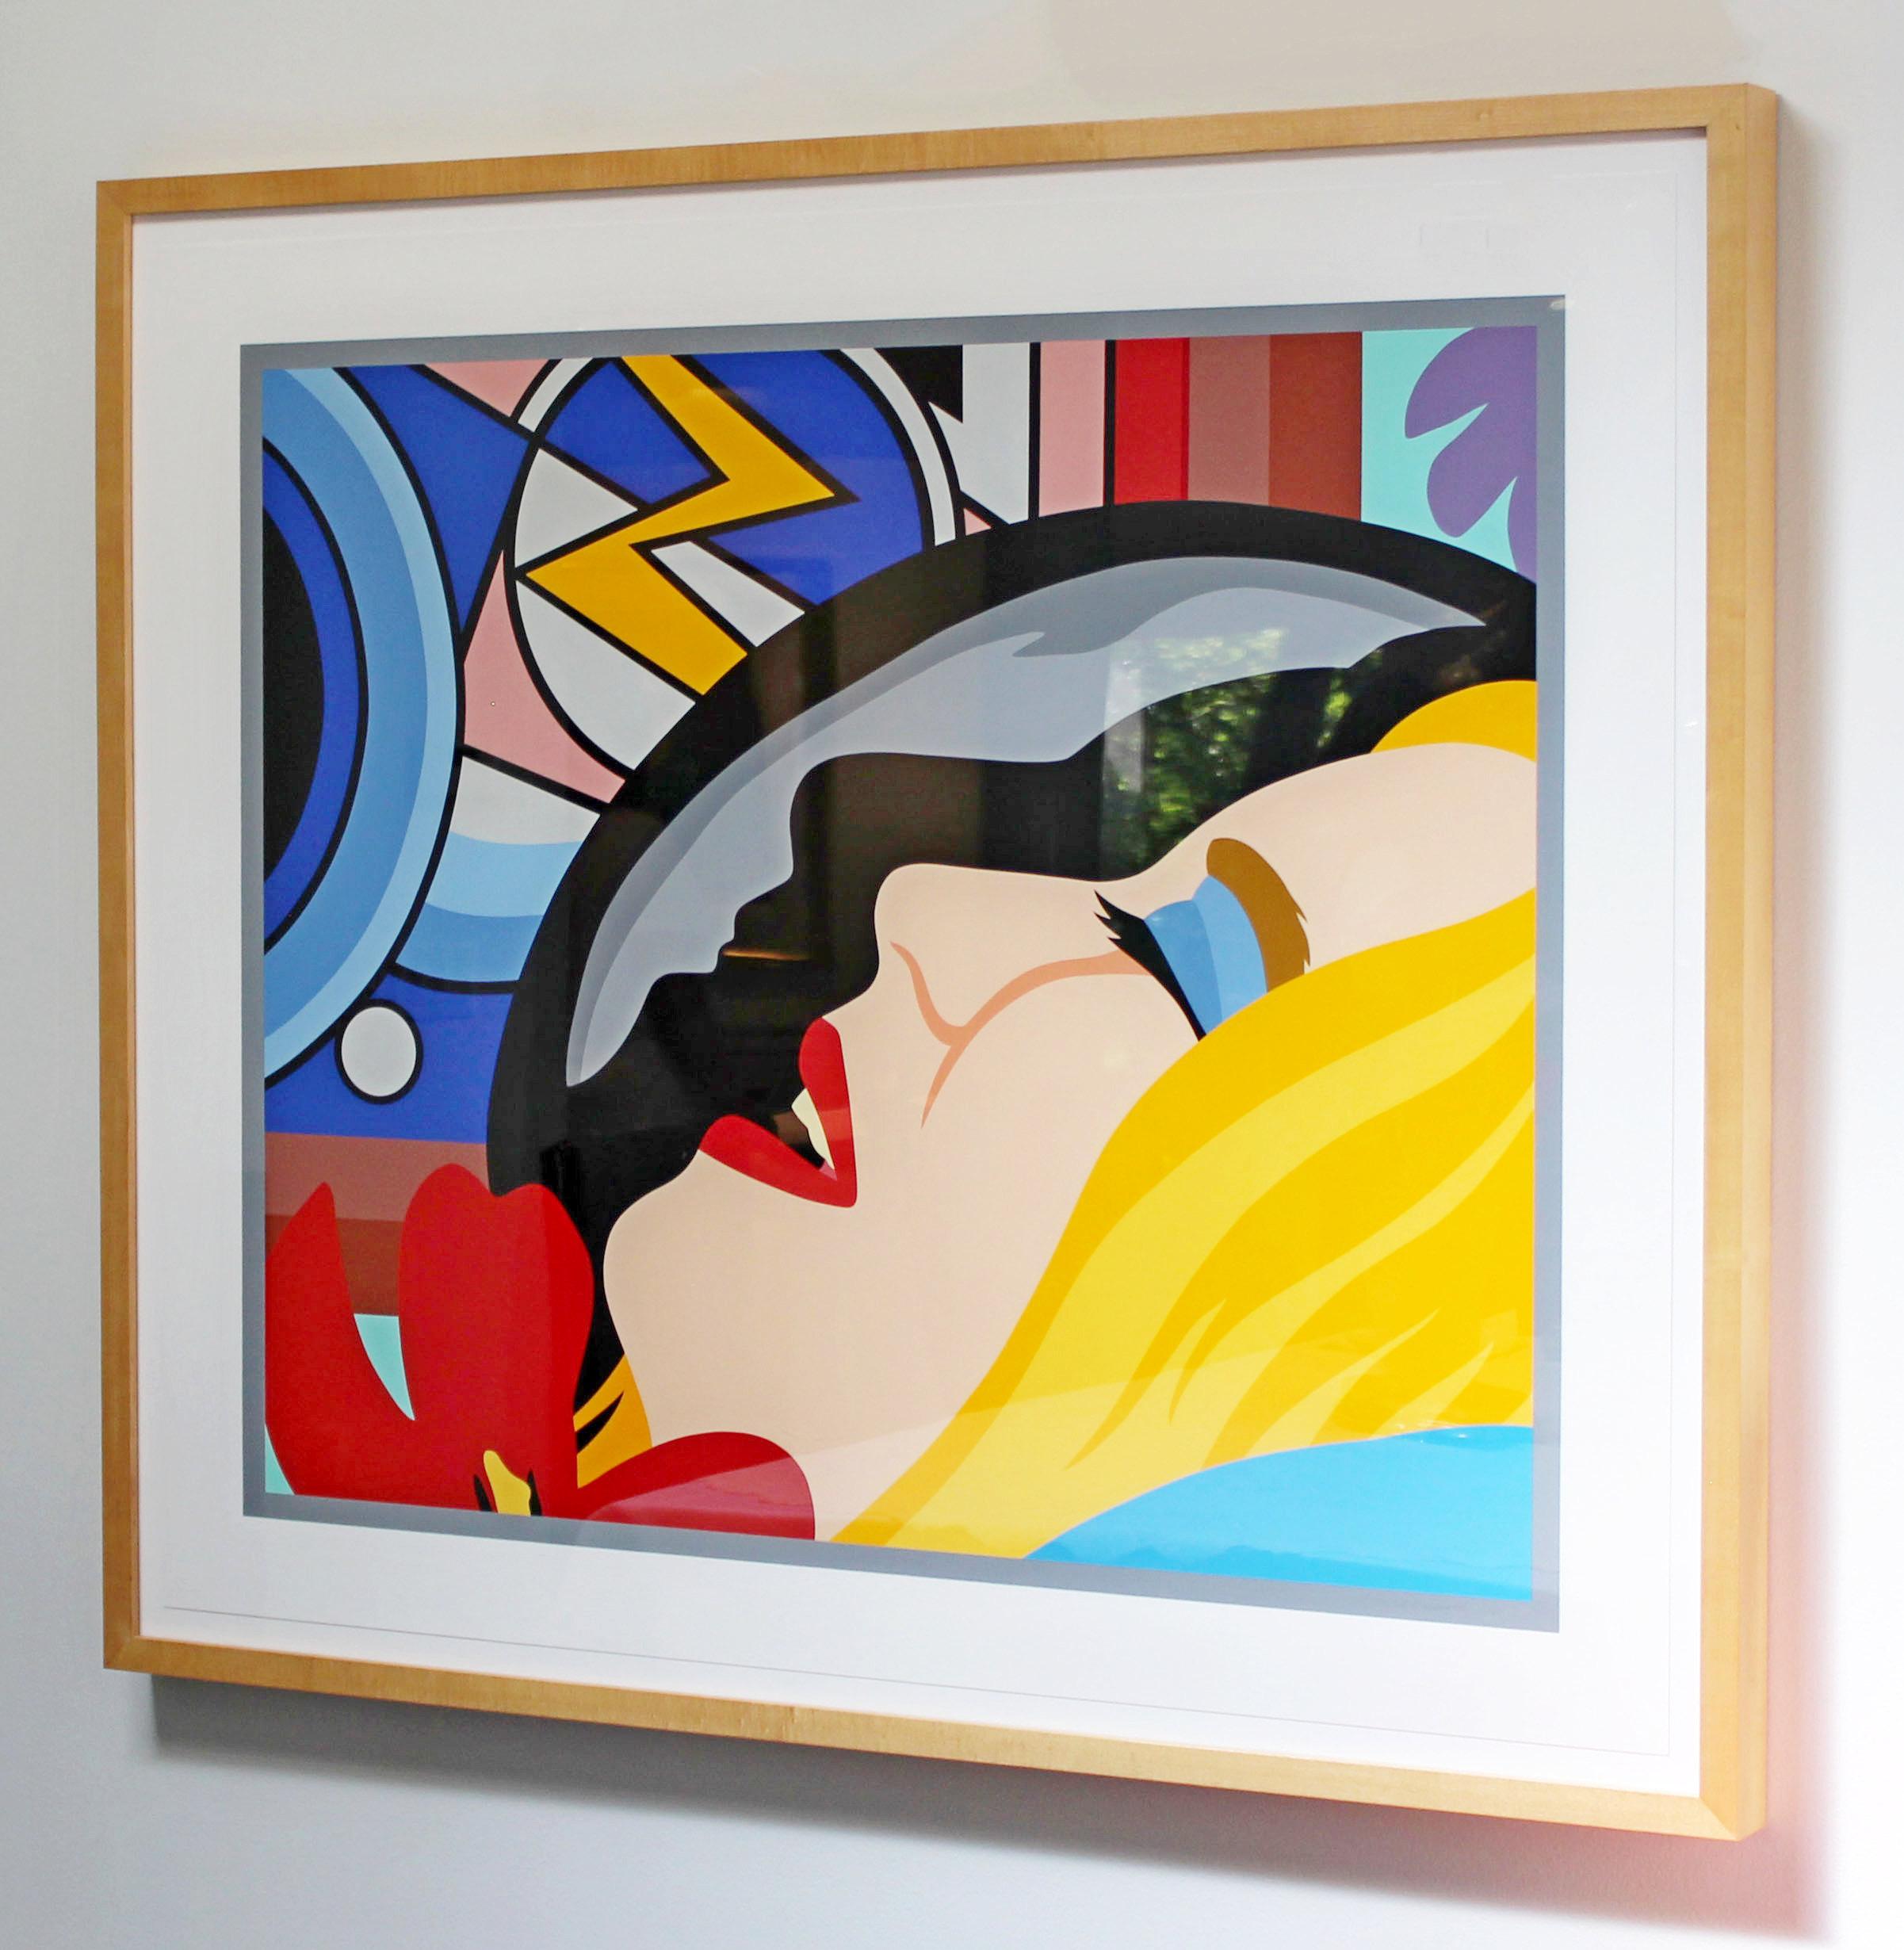 American Bedroom Face with Lichtenstein Signed Tom Wesselmann Numbered 5/60 1997